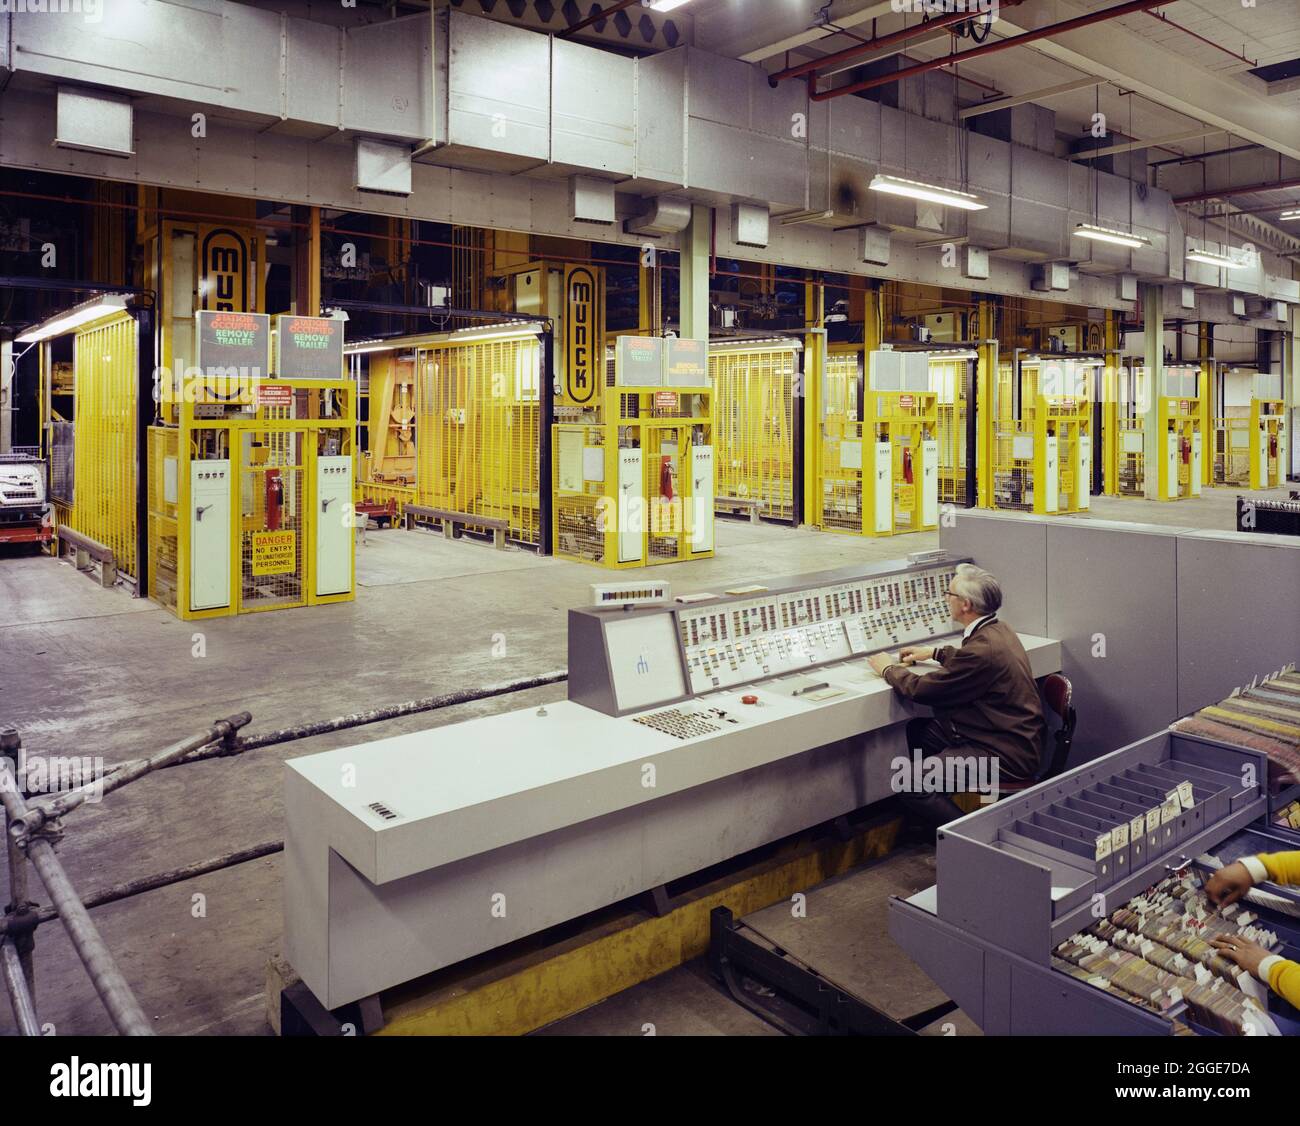 A man seated at a control desk at the Ford Motor Company Works, operating a row of Munck cranes. This image was catalogued as part of the Breaking New Ground Project in partnership with the John Laing Charitable Trust in 2019-20. Stock Photo